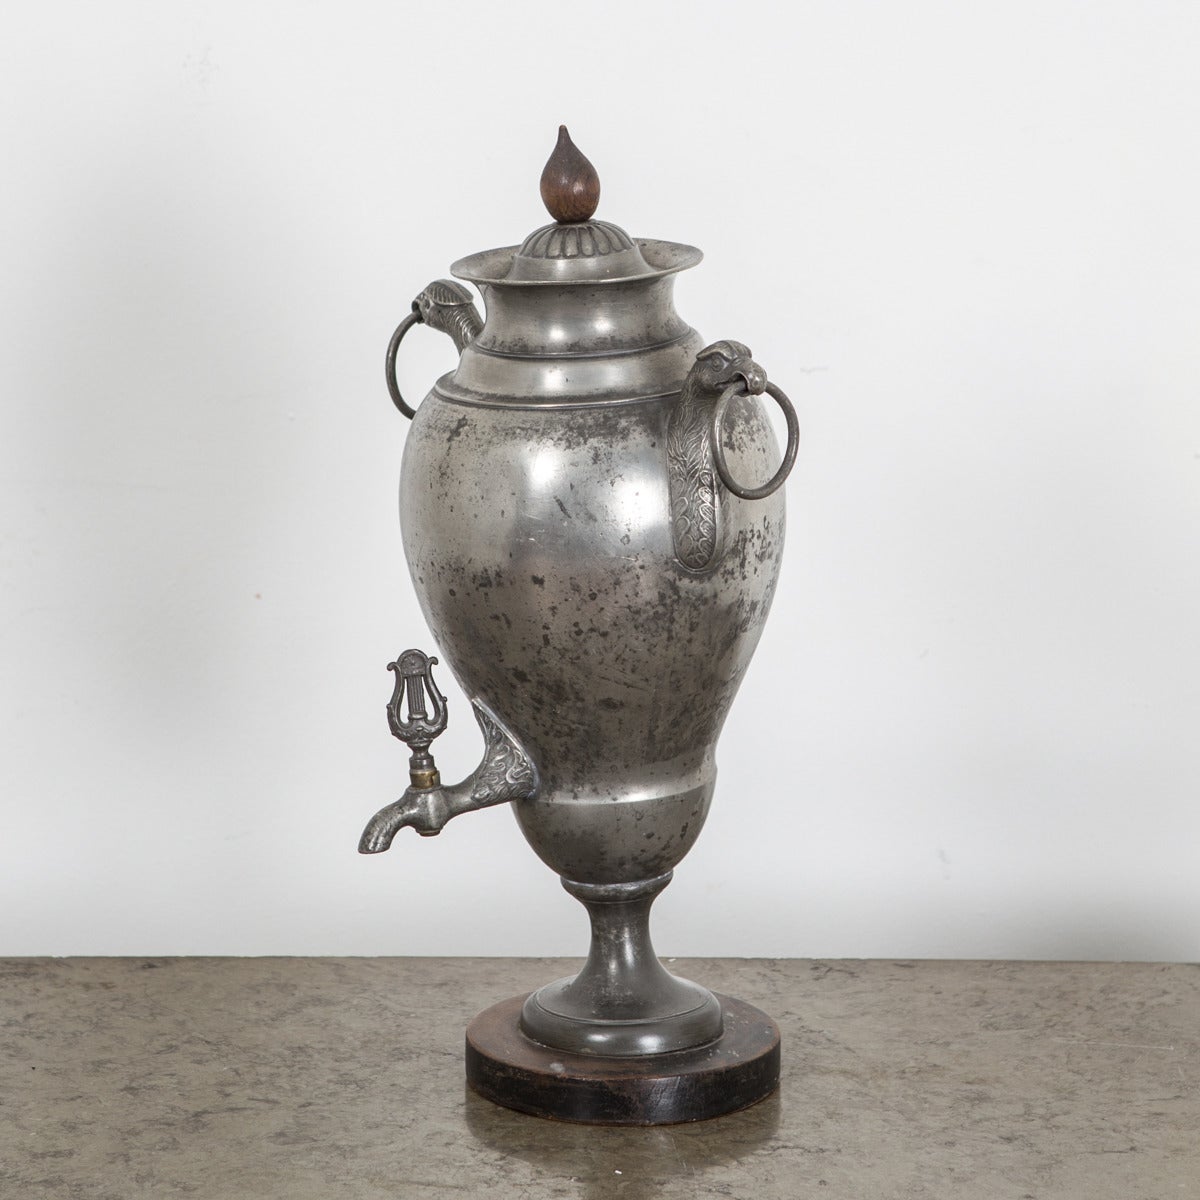 A hot water container in pewter made in Sweden during the first part of the 18th Century and the Empire period. Wooden details such as lid finial and base.